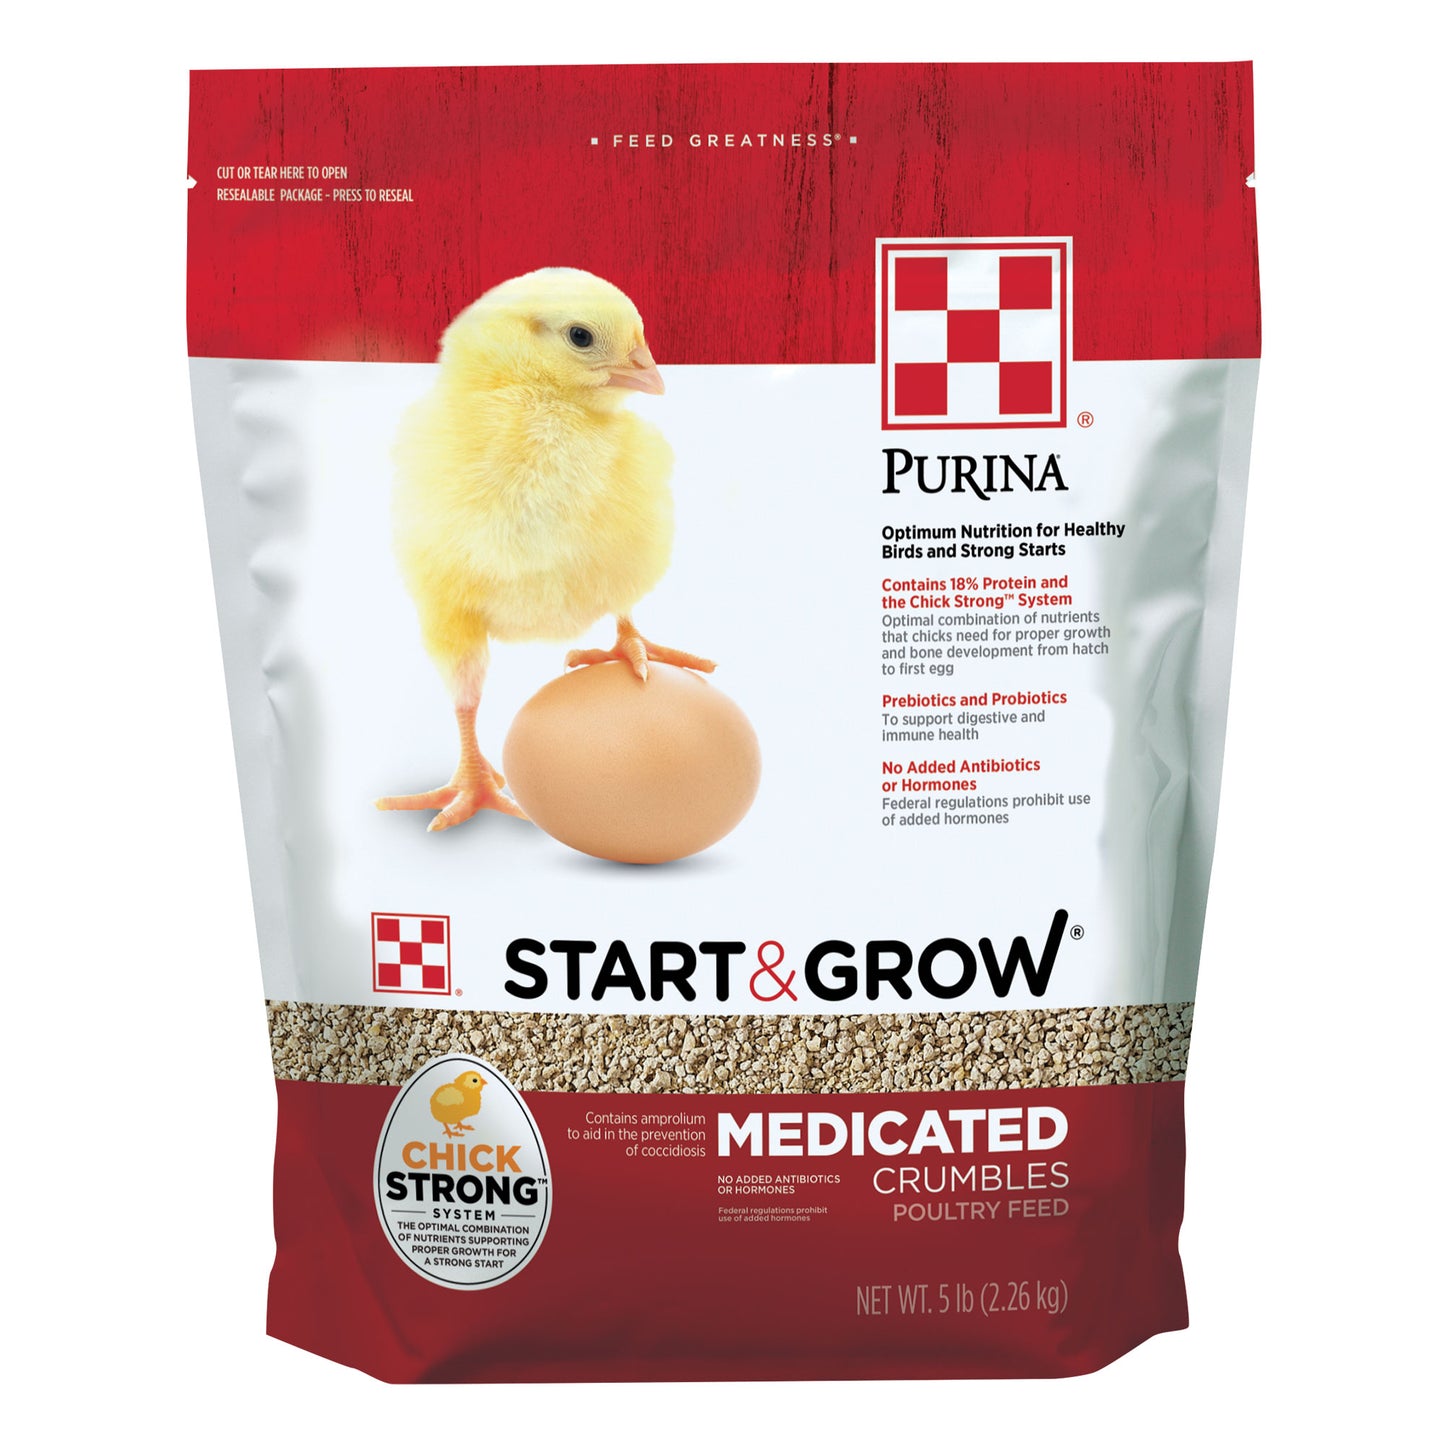 Purina Start & Grow Medicated Poultry Feed 5 Pound bag